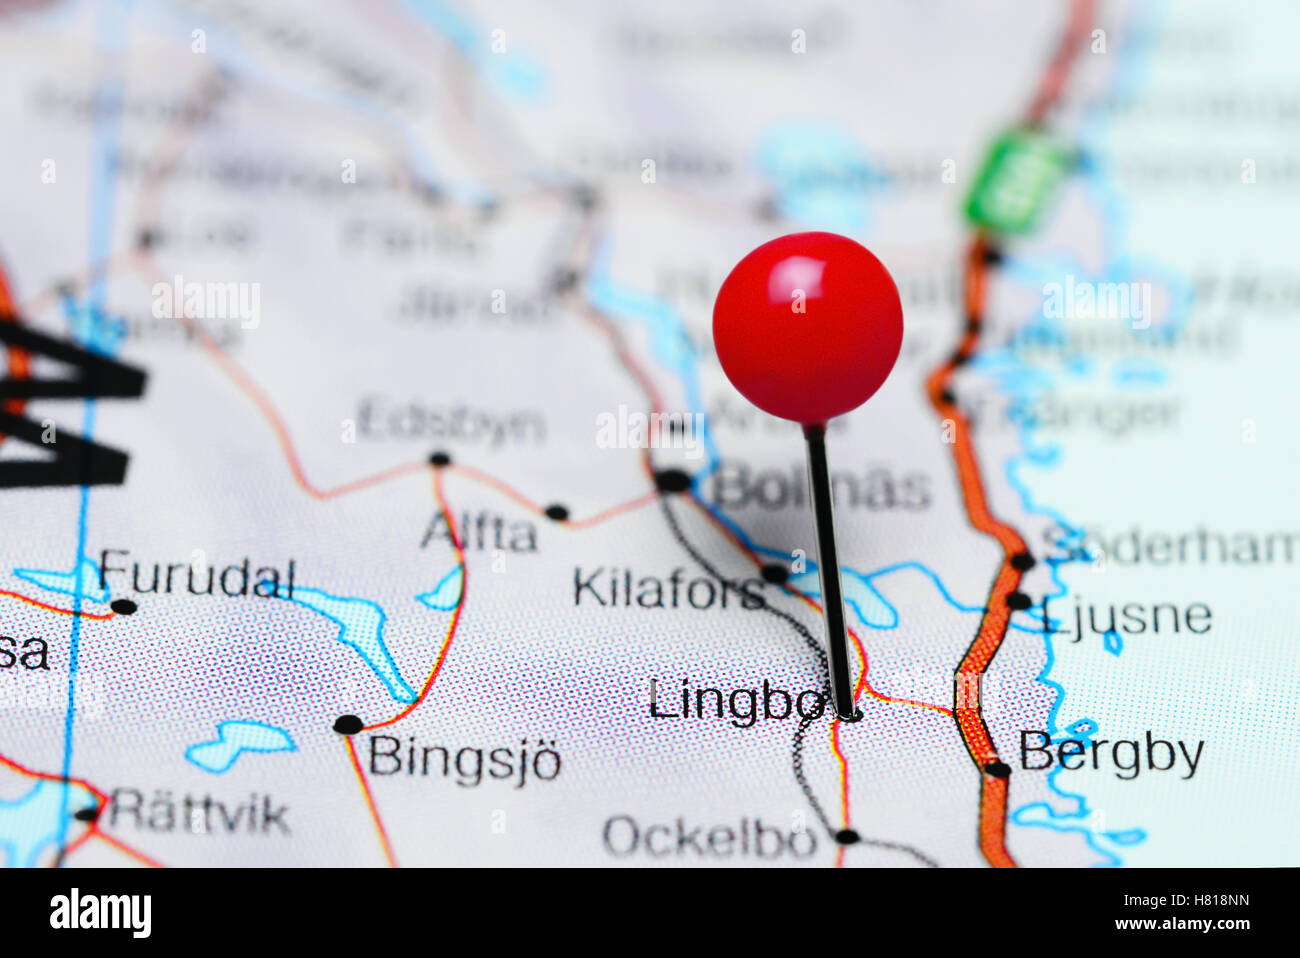 Lingbo pinned on a map of Sweden Stock Photo